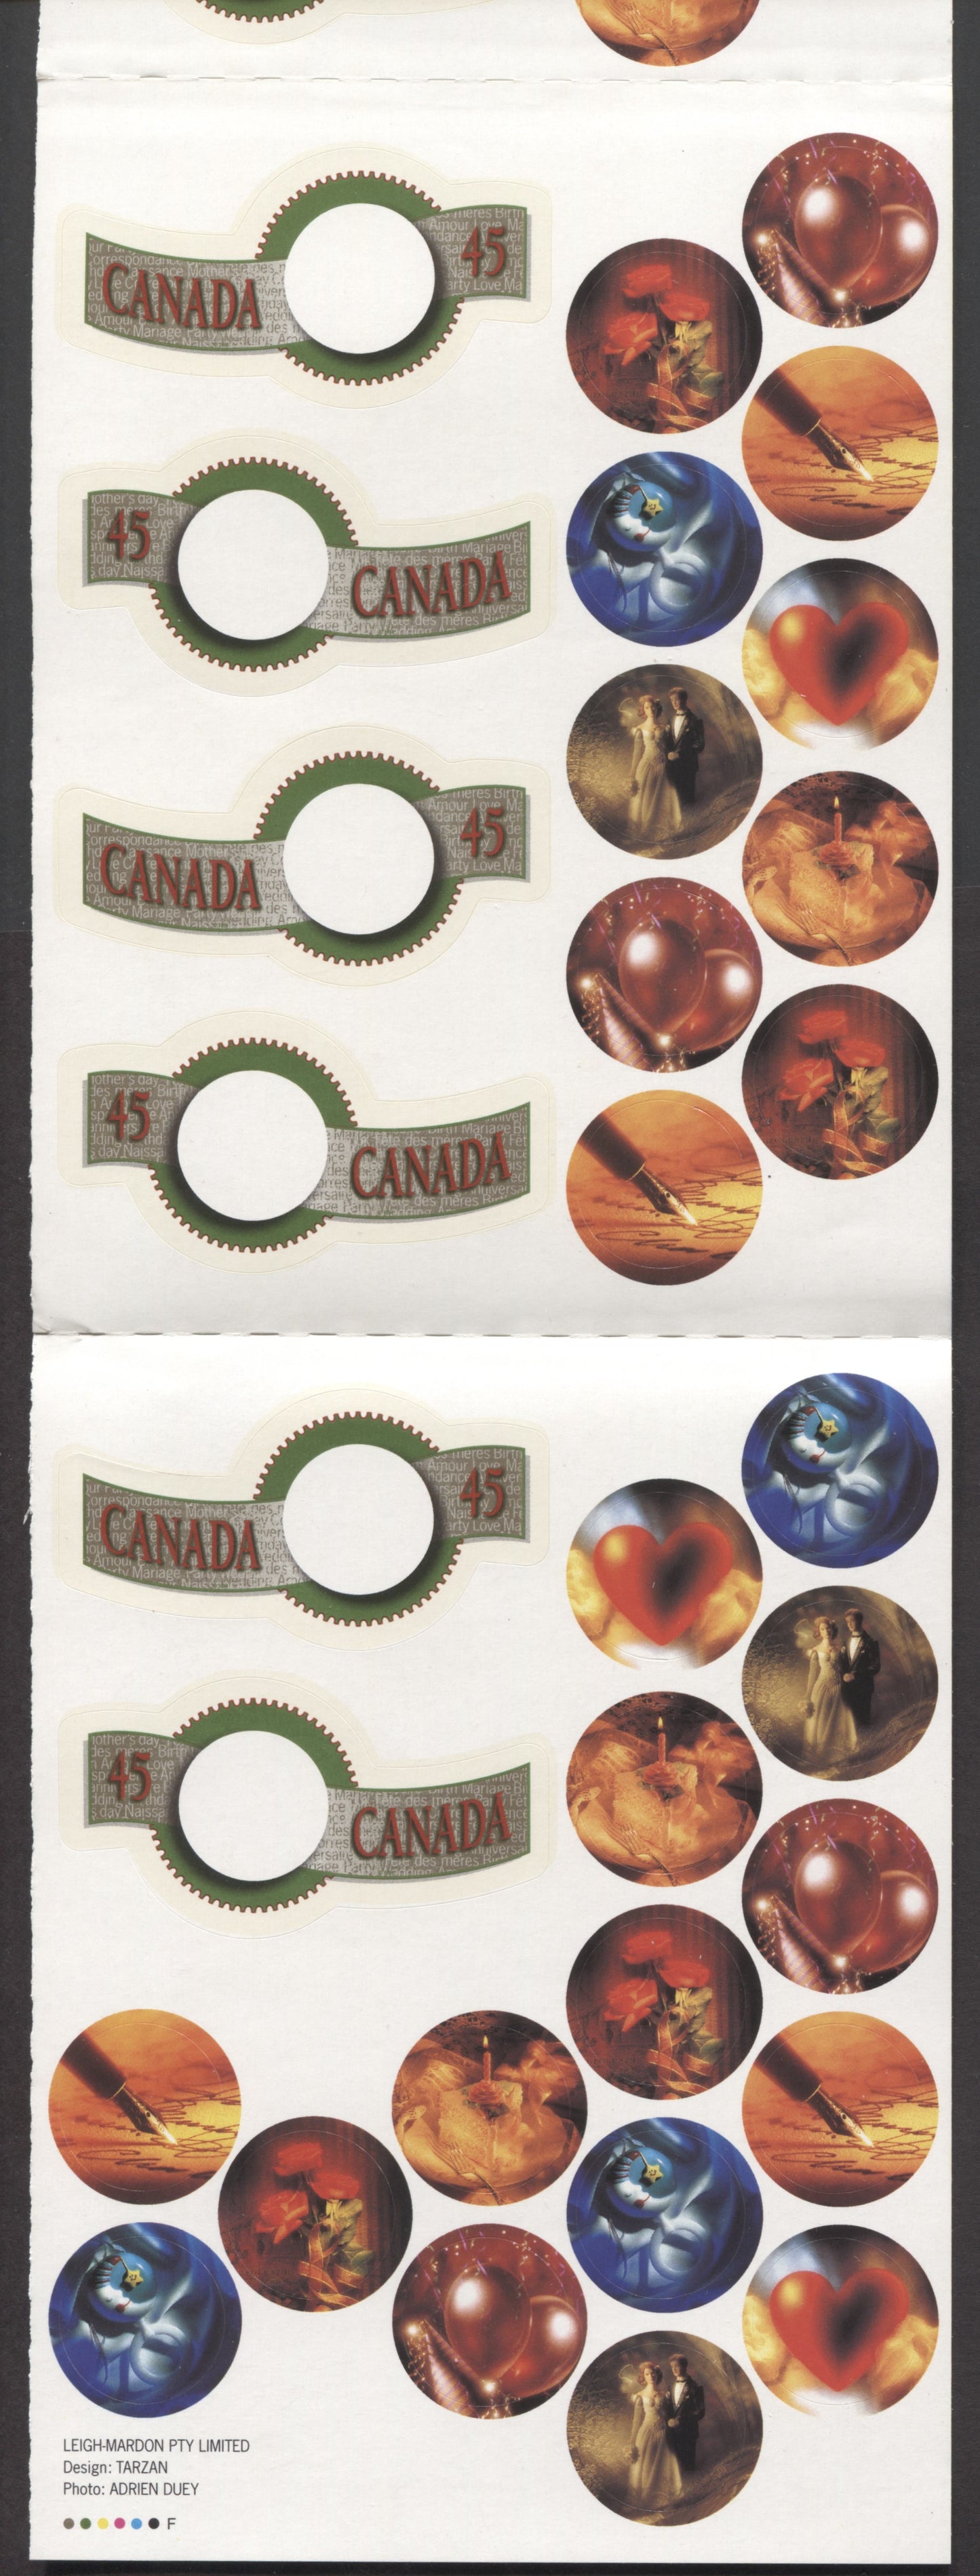 Canada #BK190a-b 1996 Greetings Issue, Complete $4.70 Booklet, Fasson Paper, Fluorescent Paper, 4 mm Tagged to Shape